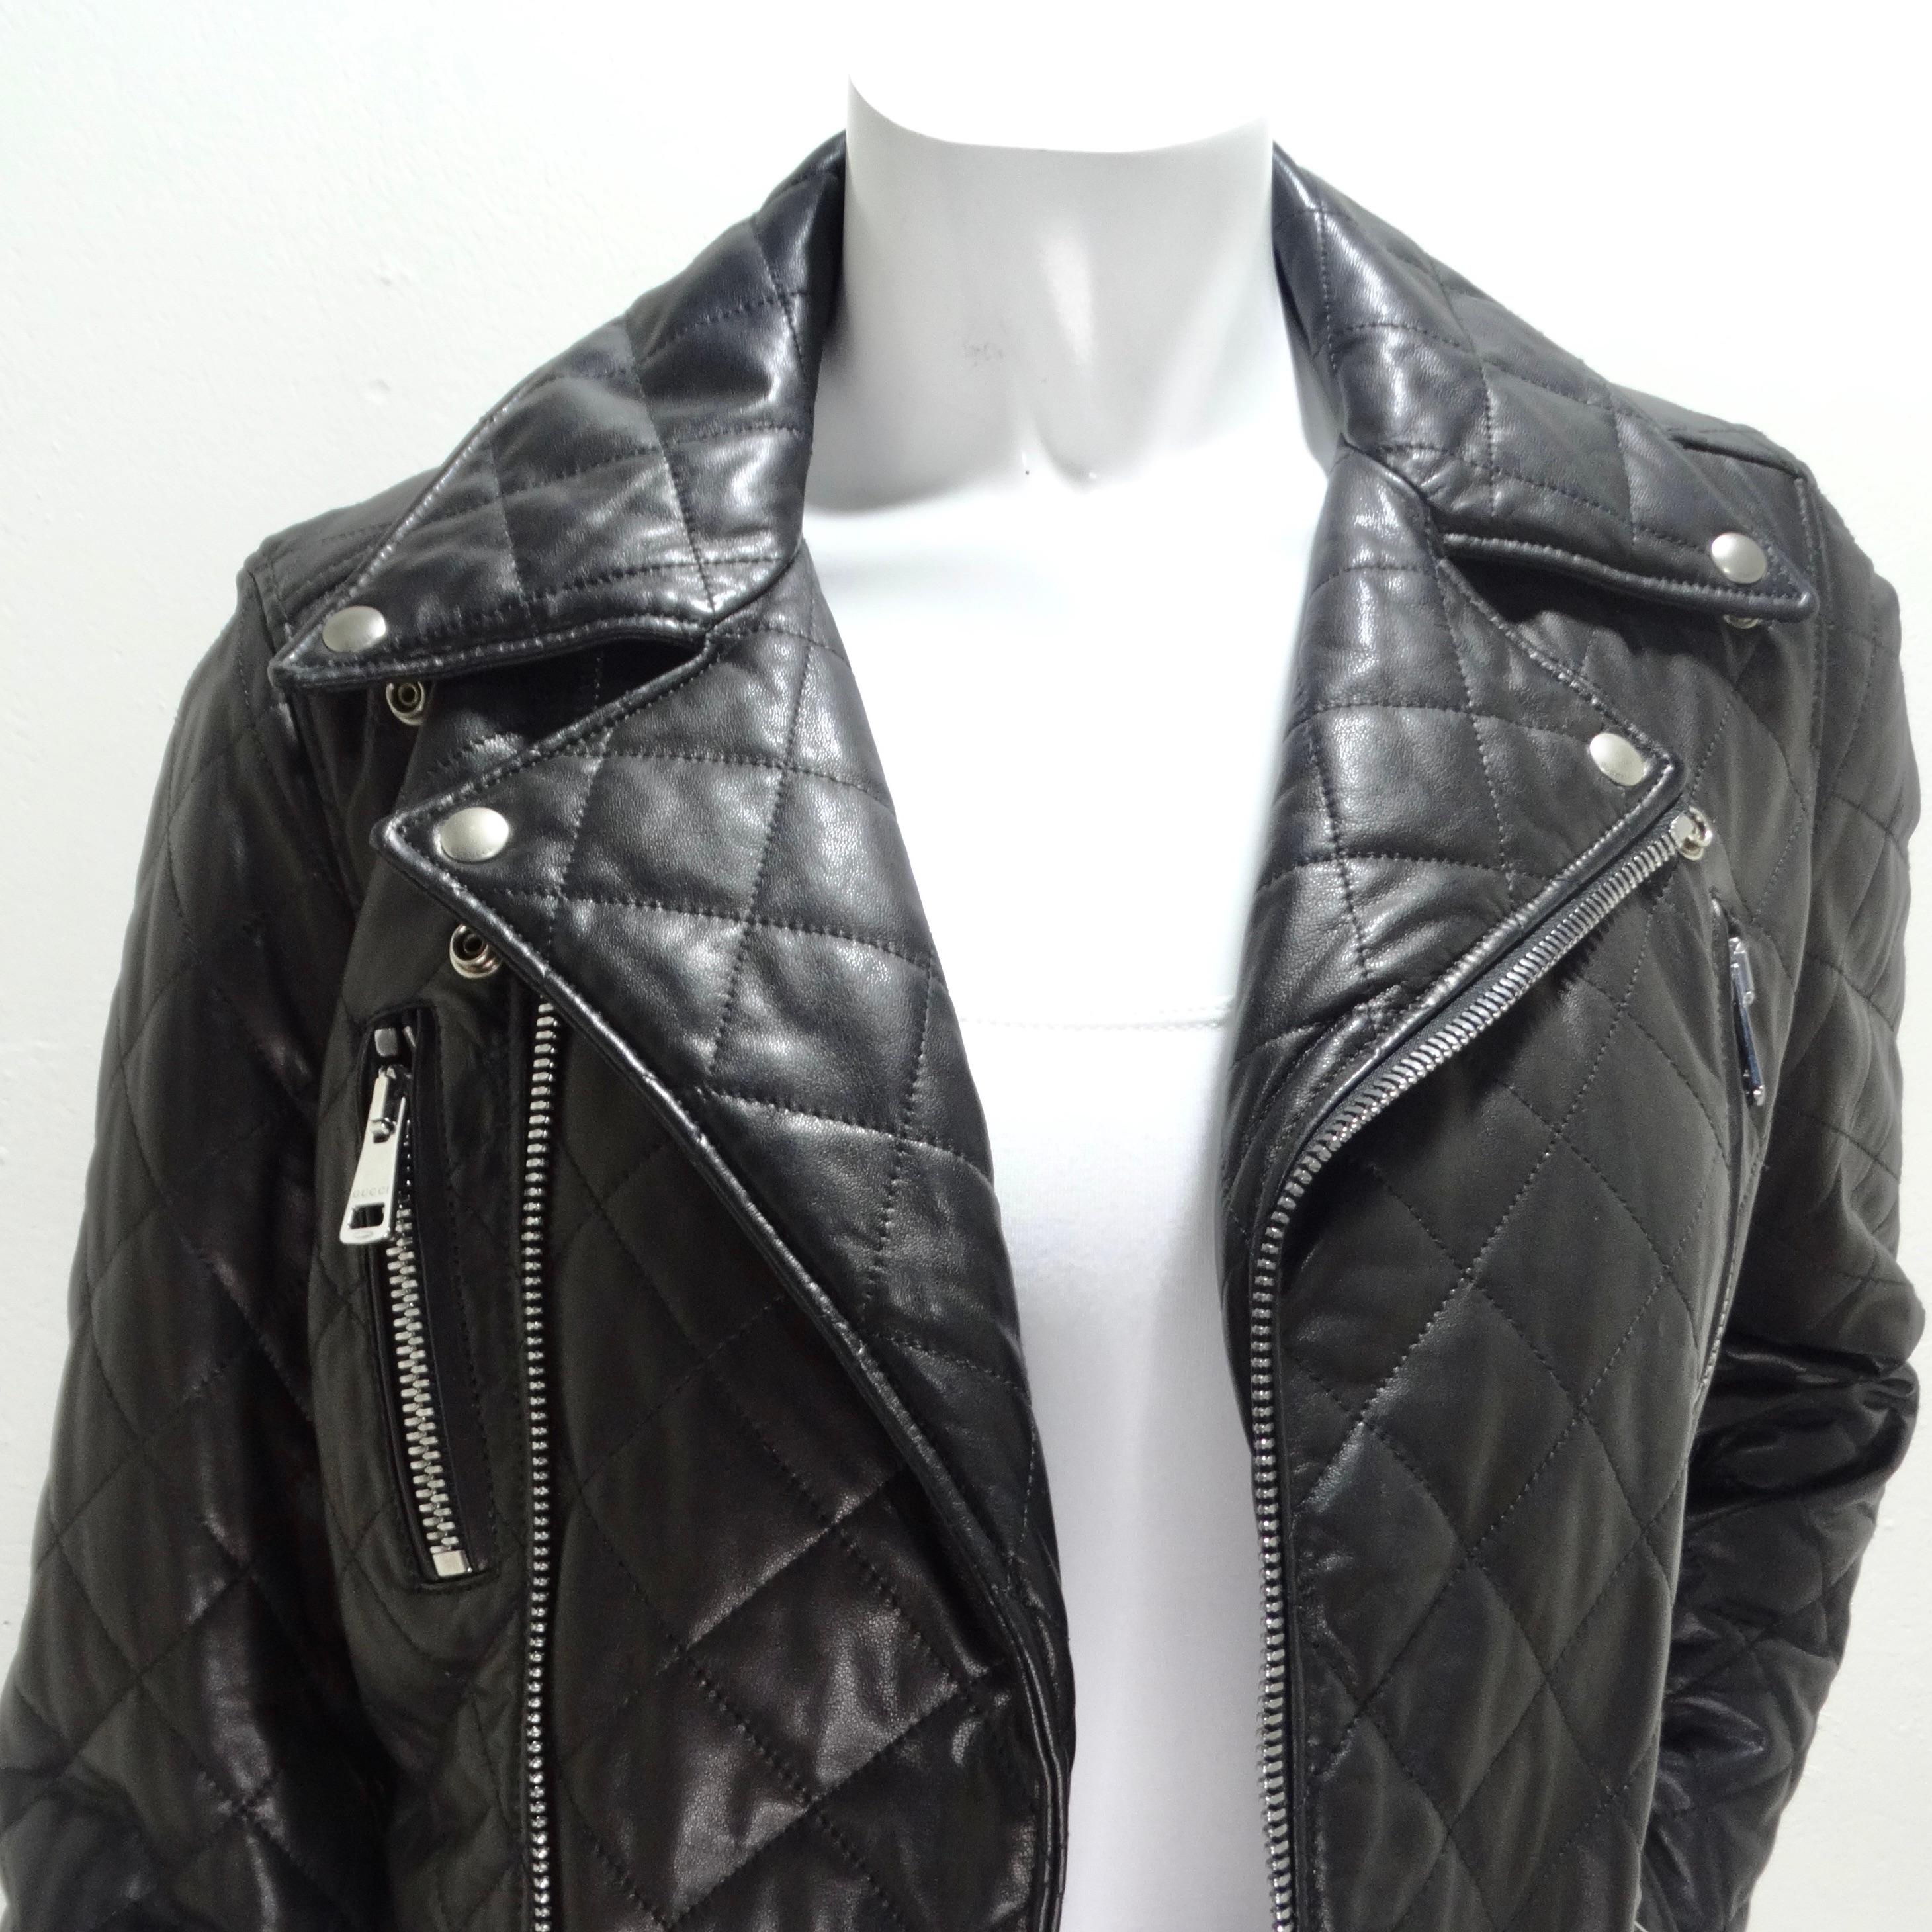 Gucci Black Leather Pearl Logo Moto Jacket In Excellent Condition For Sale In Scottsdale, AZ